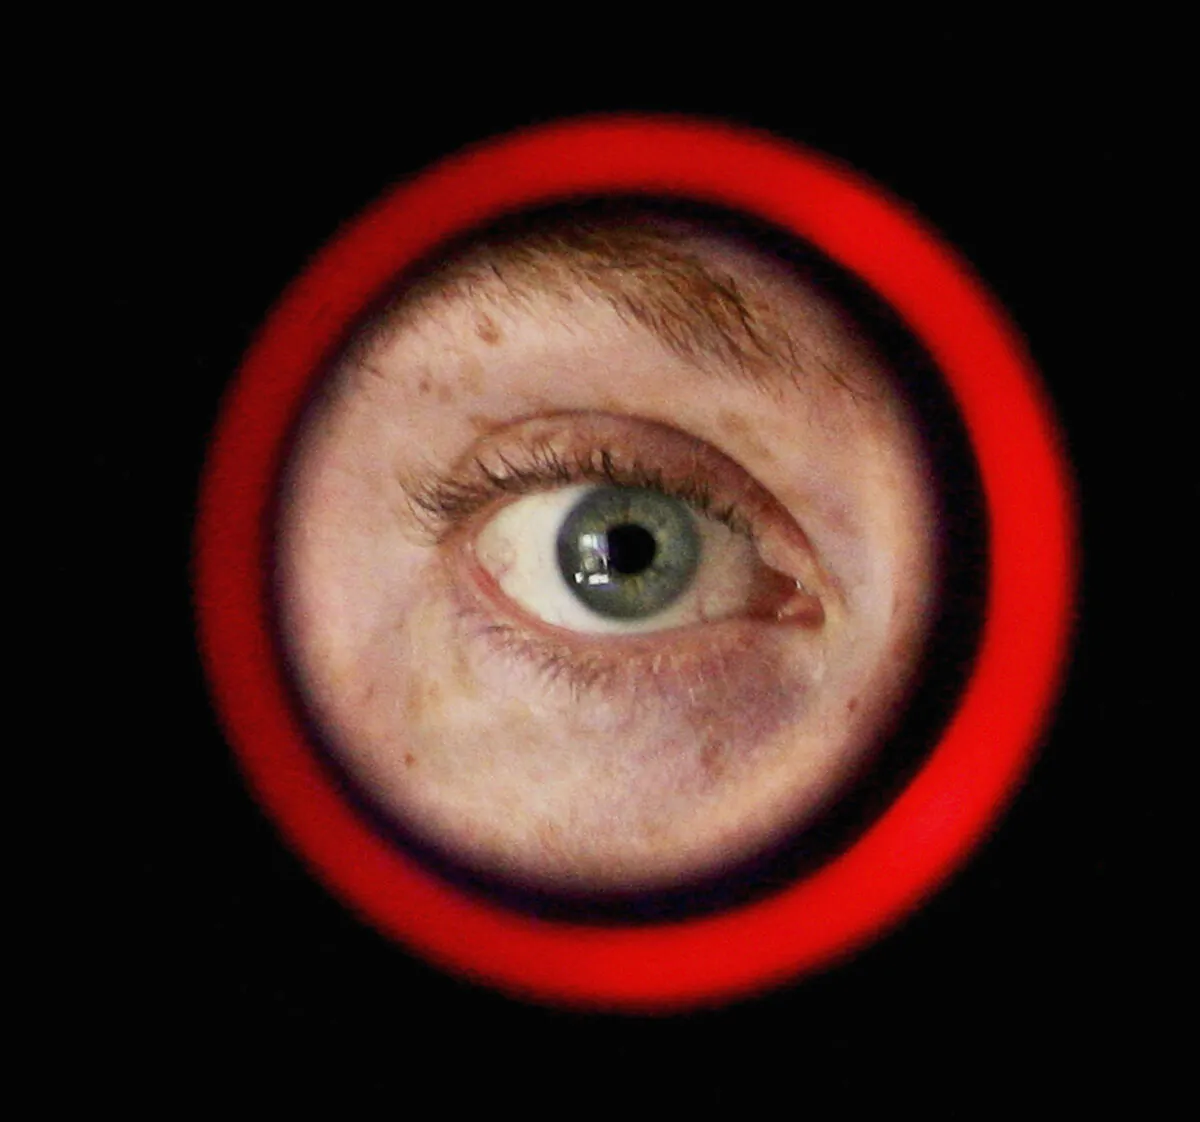 An iris-recognition device is operated at Argus Soloutions in Sydney, Australia, on Aug. 11, 2005. (Ian Waldie/Getty Images)